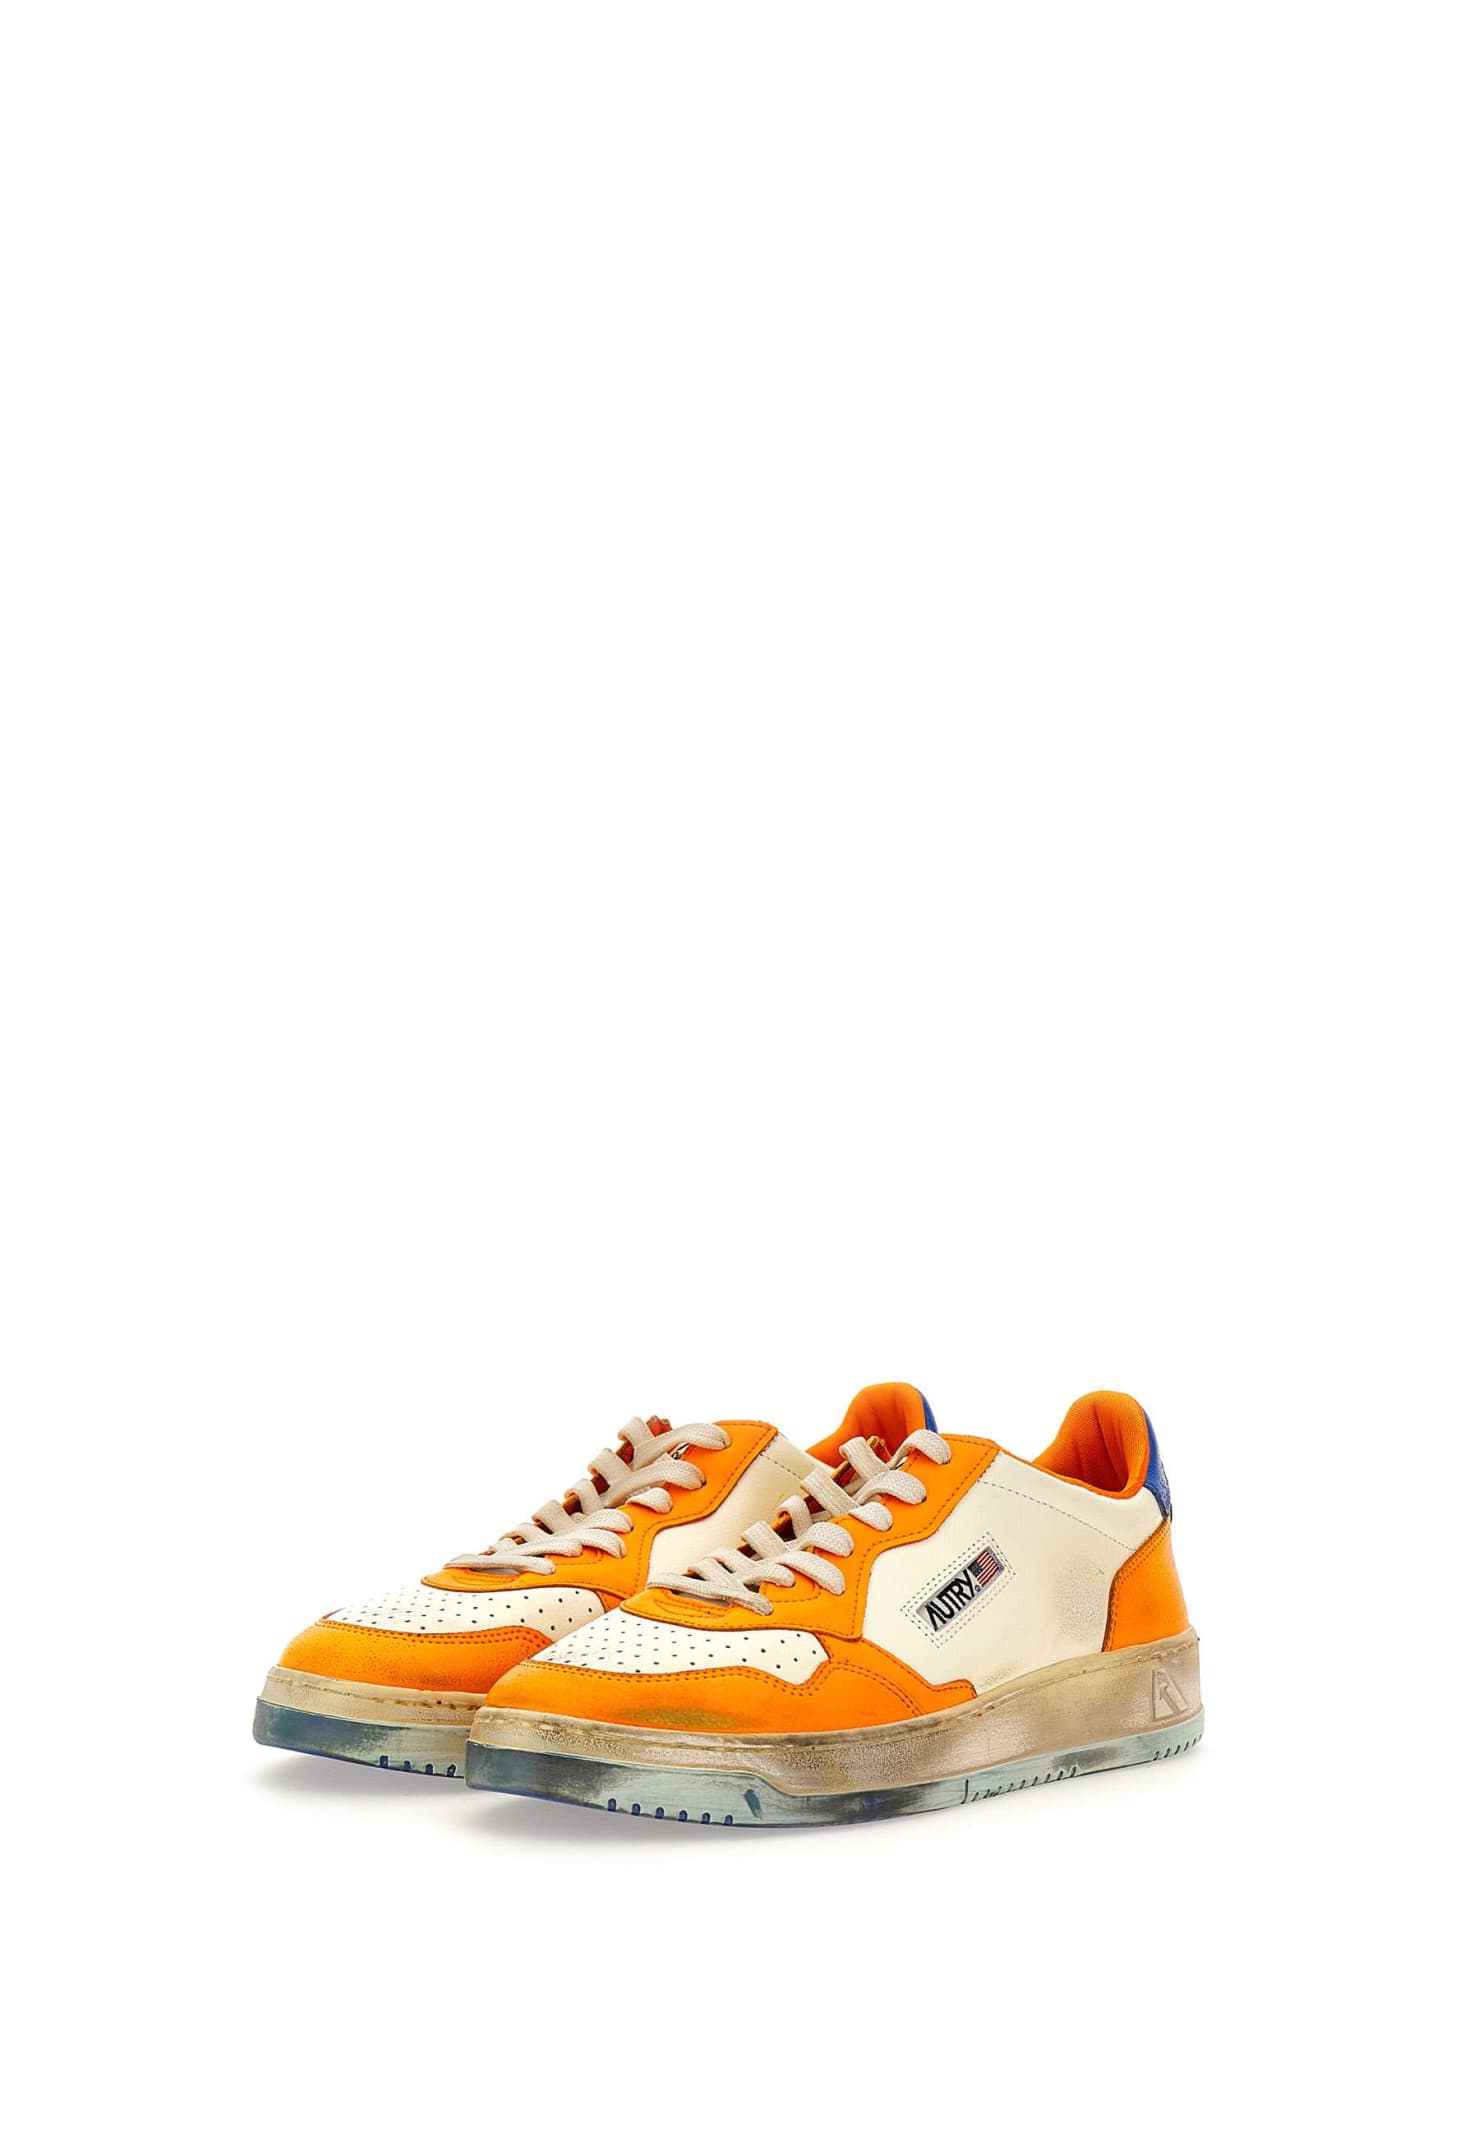 Shop Autry Avlm Bc04 Sneakers In White-orange-blue